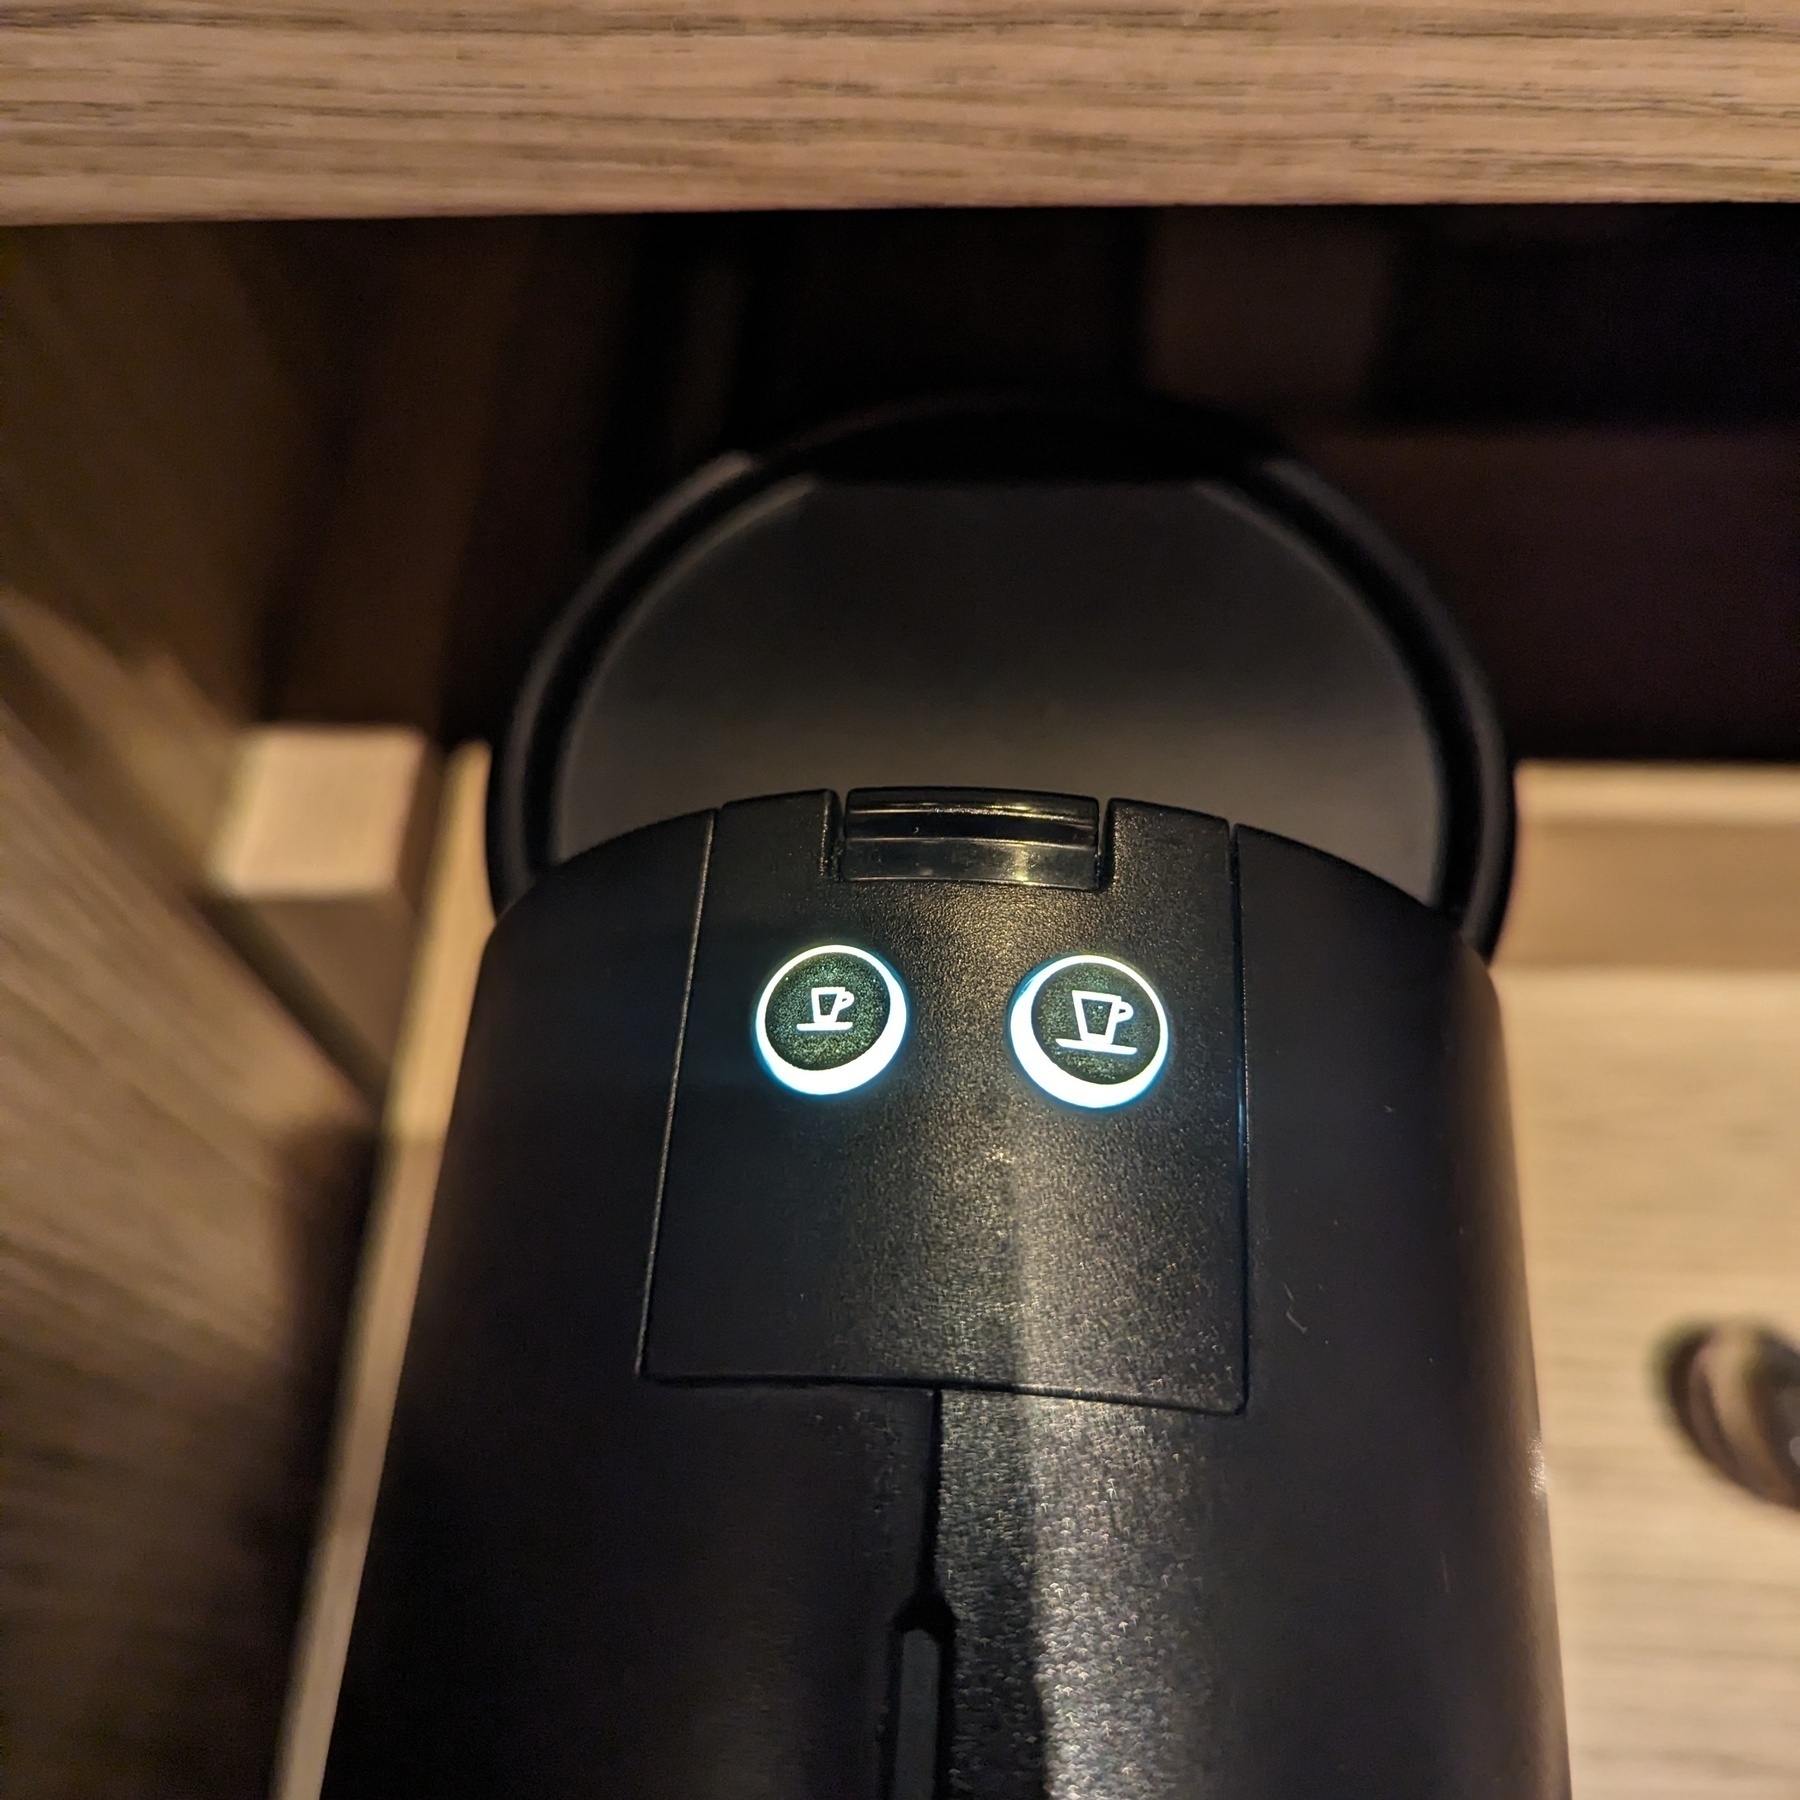 The top of a pod coffee machine, with two illuminated buttons, the power button that looks like a release for the water tank, and the top of the water tank itself